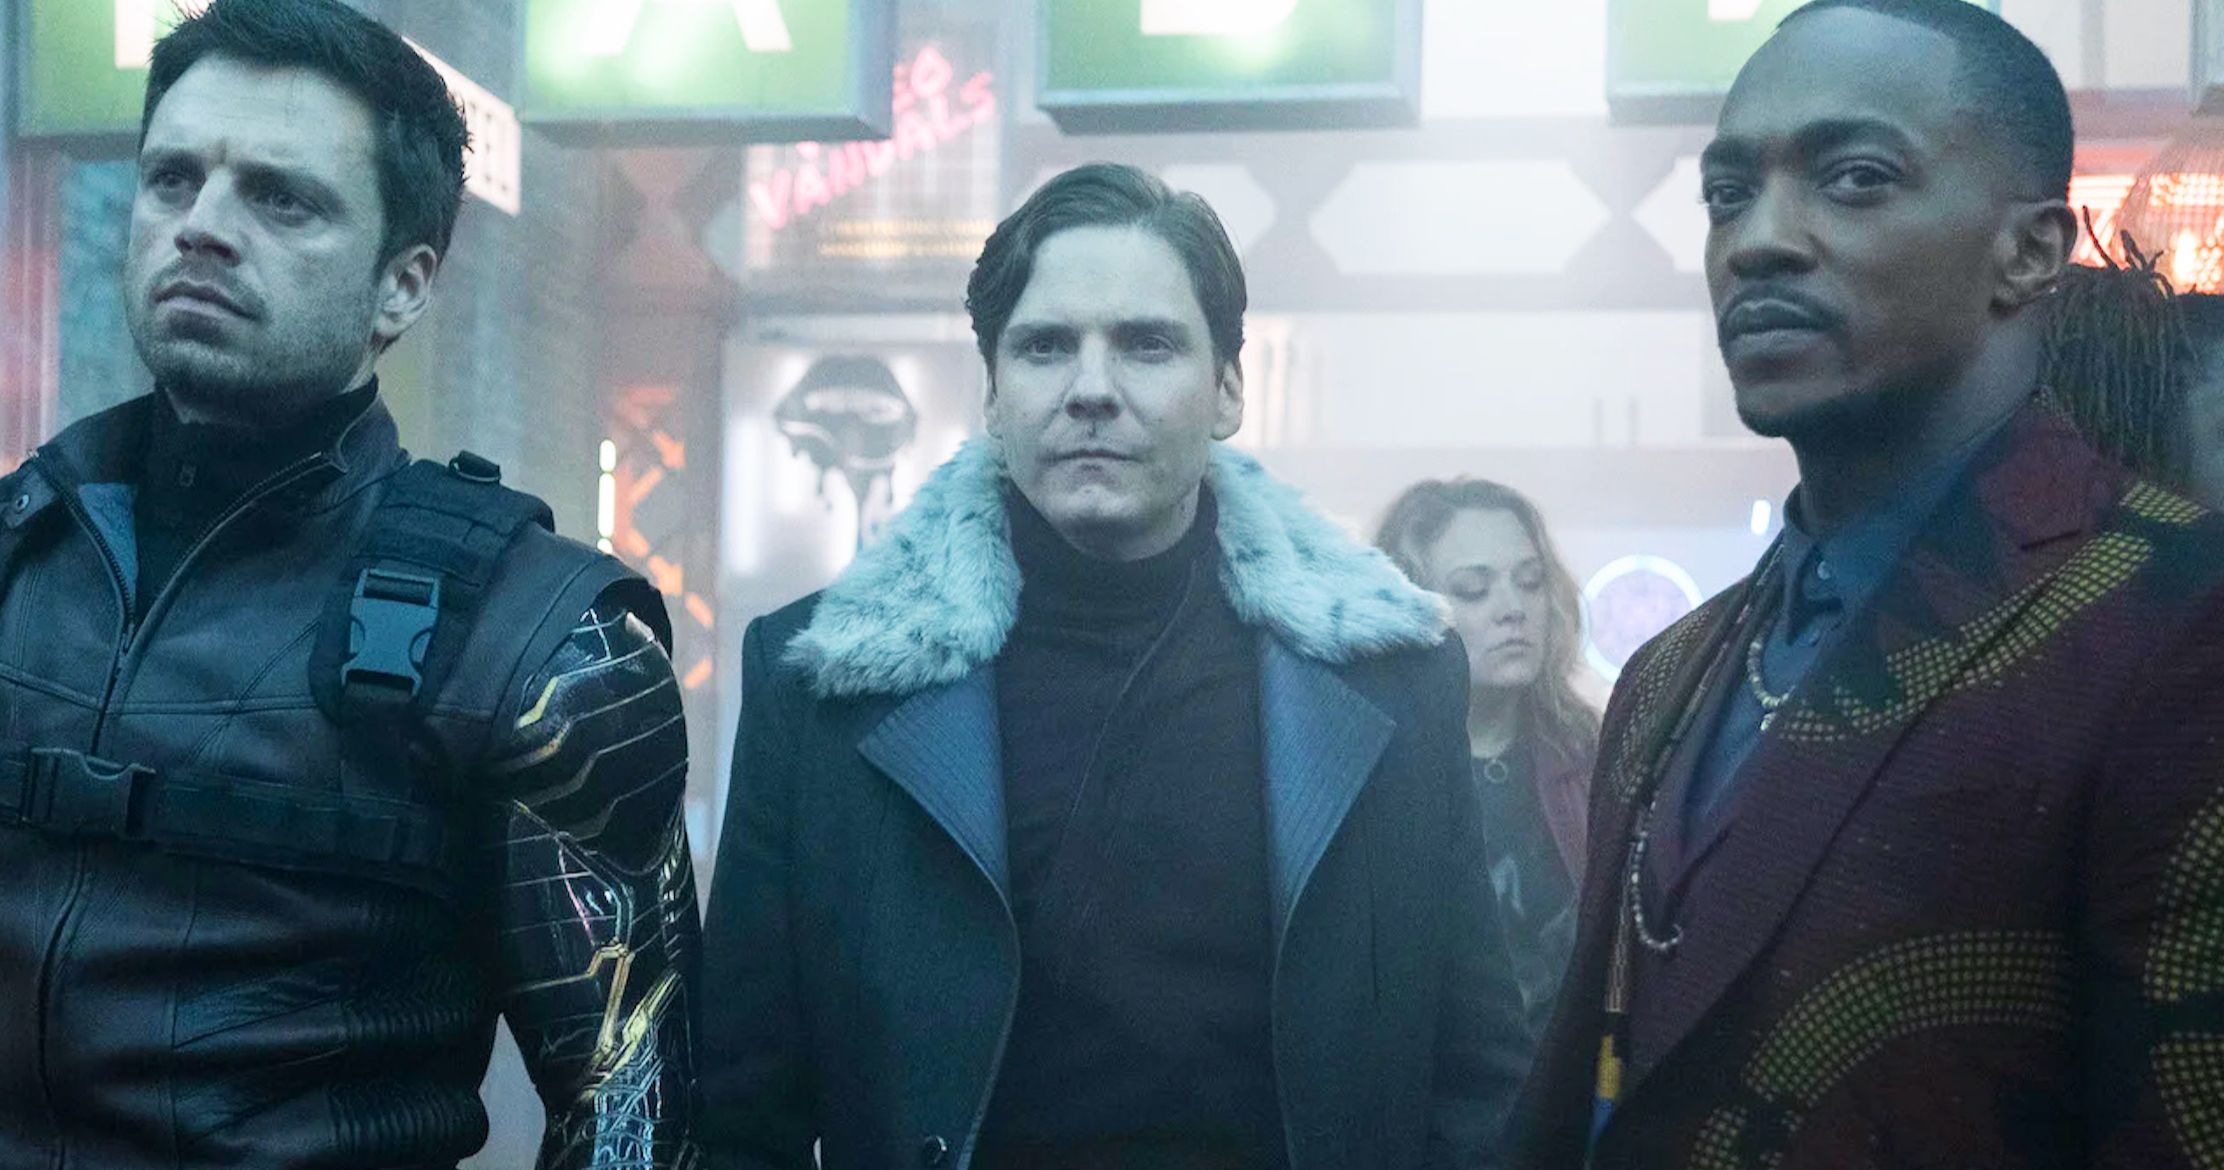 Baron Zemo Actor Teases Wakanda Conflict in Future The Falcon and the Winter Soldier Episodes